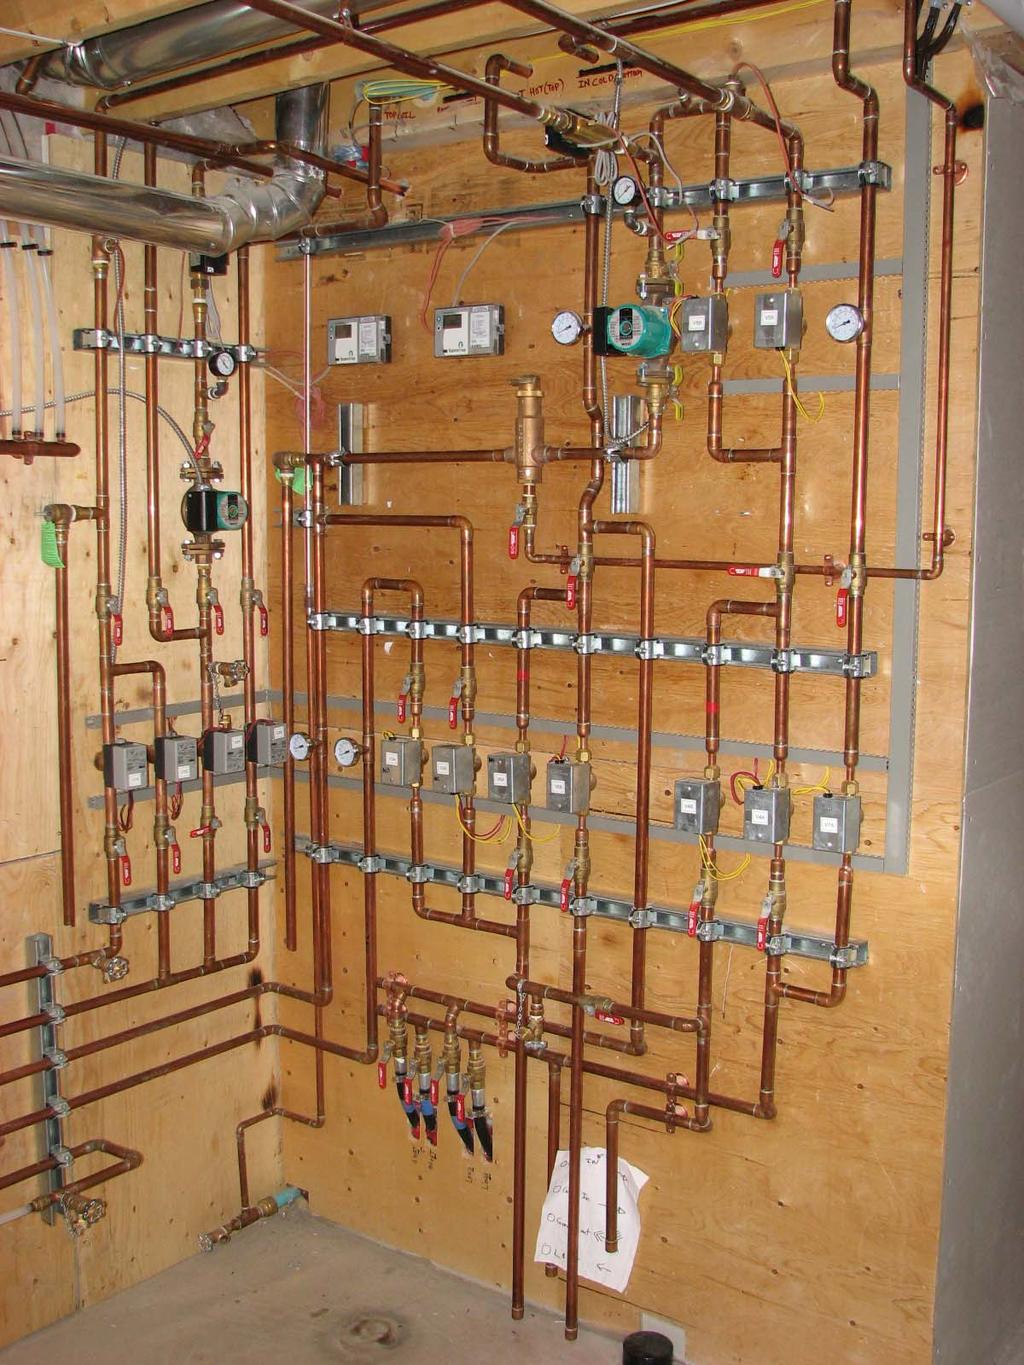 Utility Room Solar Plumbing Layout When completed, the piping will be insulated and colourcoded with direction arrows.